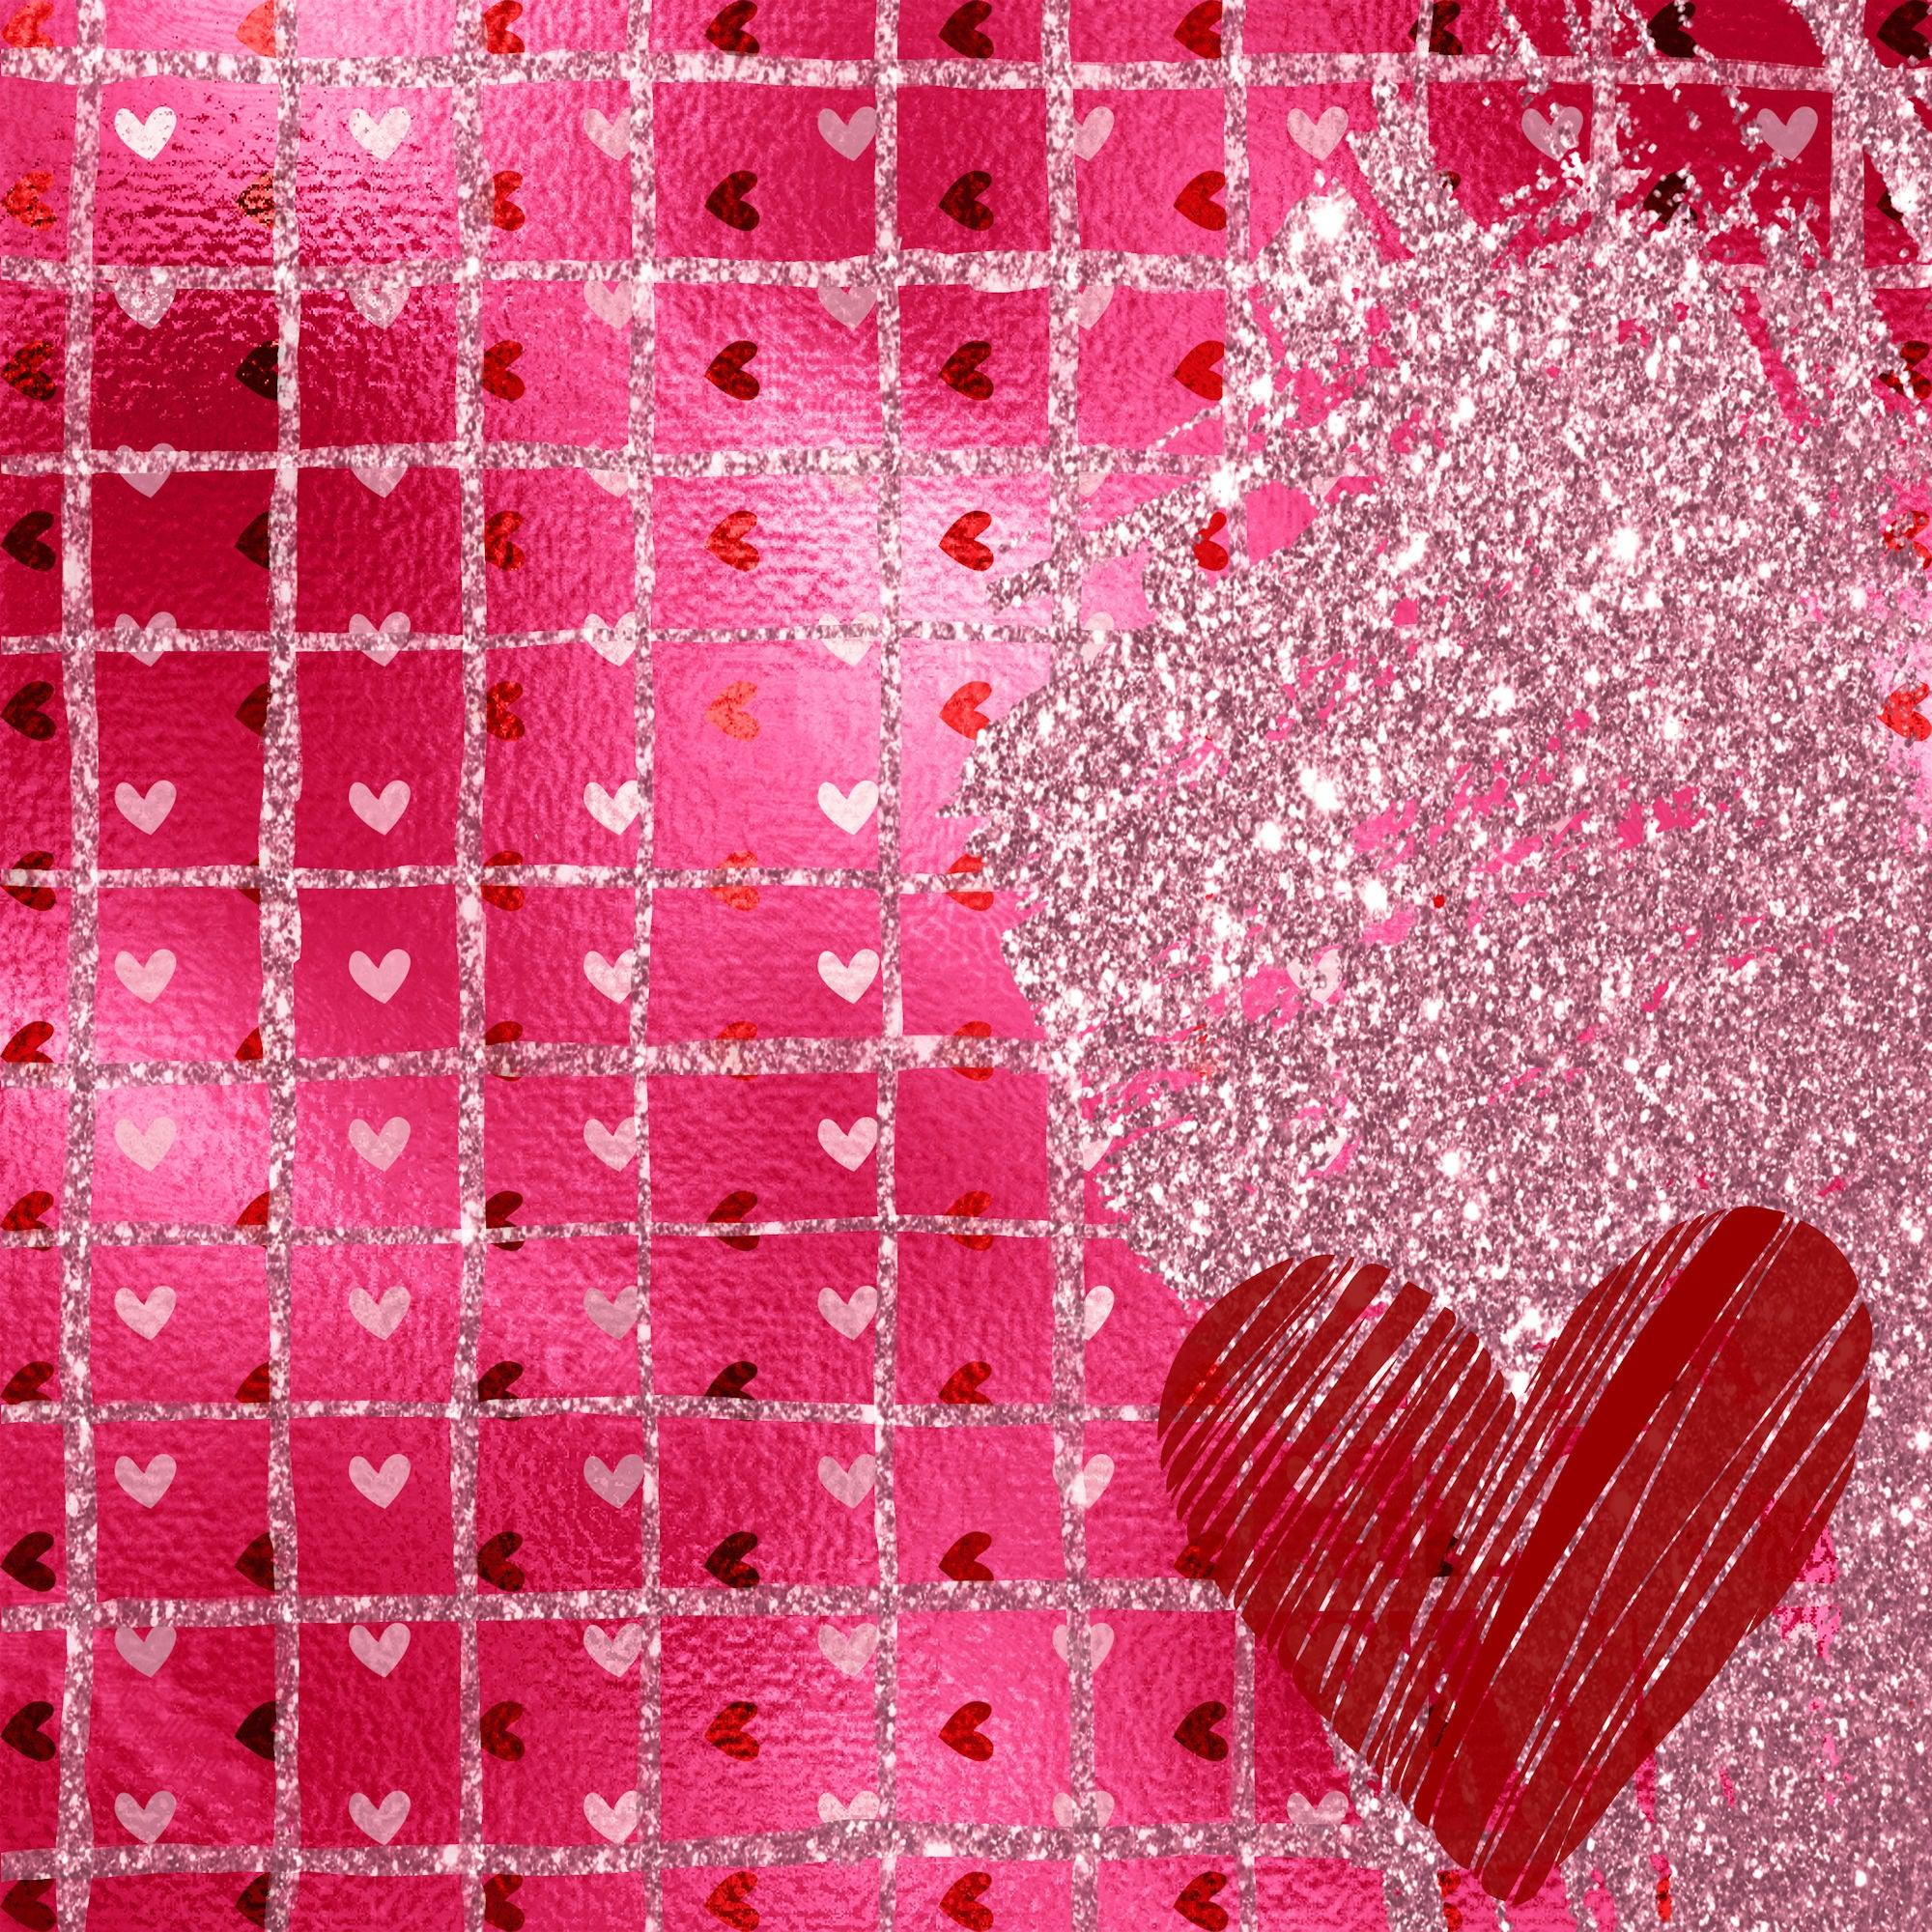 Be Mine Valentine Collection Hearts On Fire 12 x 12 Double-Sided Scrapbook Paper by SSC Designs - Scrapbook Supply Companies